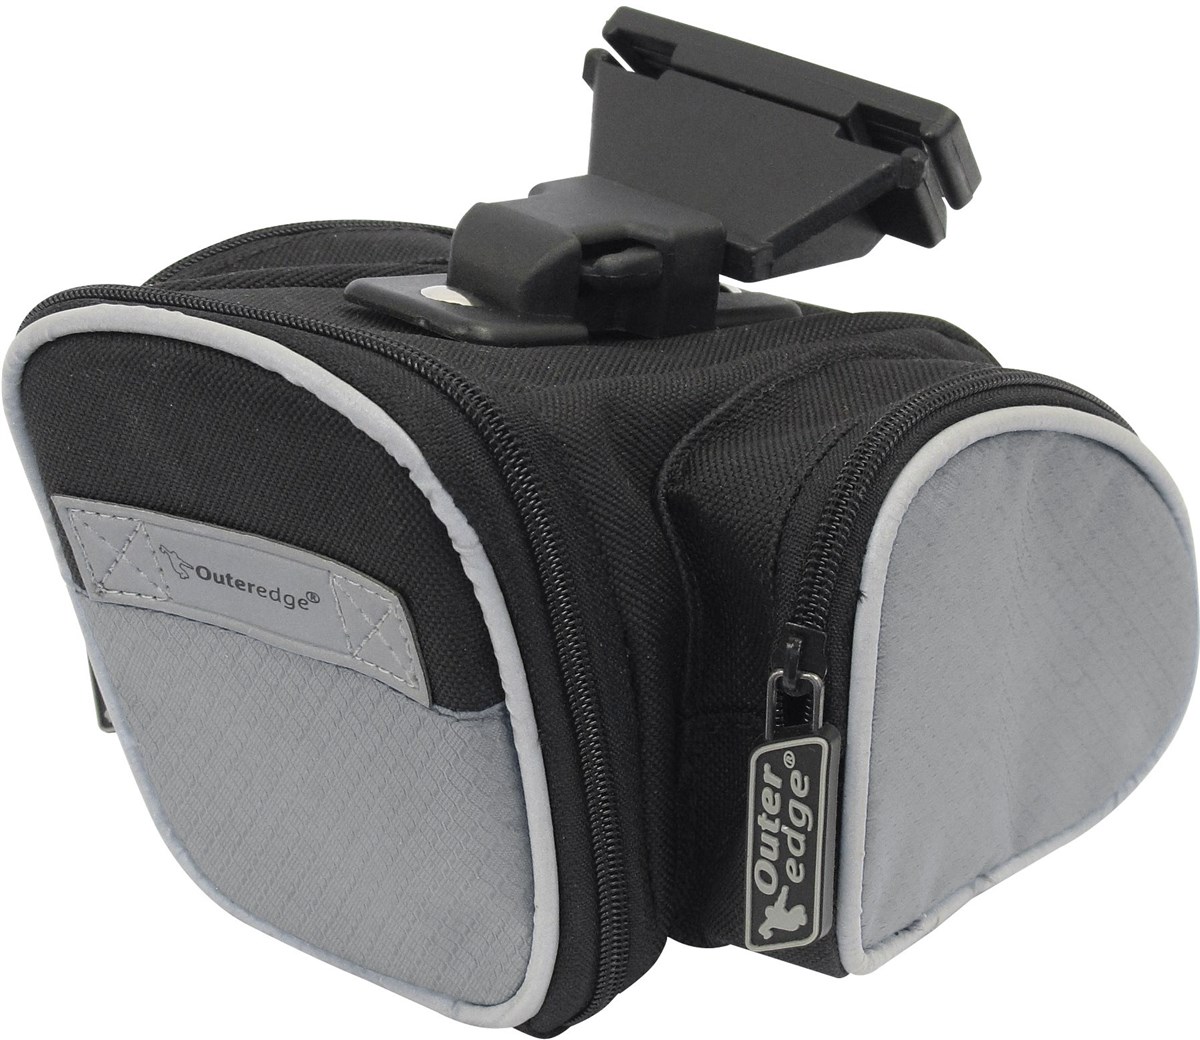 Outeredge Triple Pocket Saddle Bag with Q/R Fitting product image